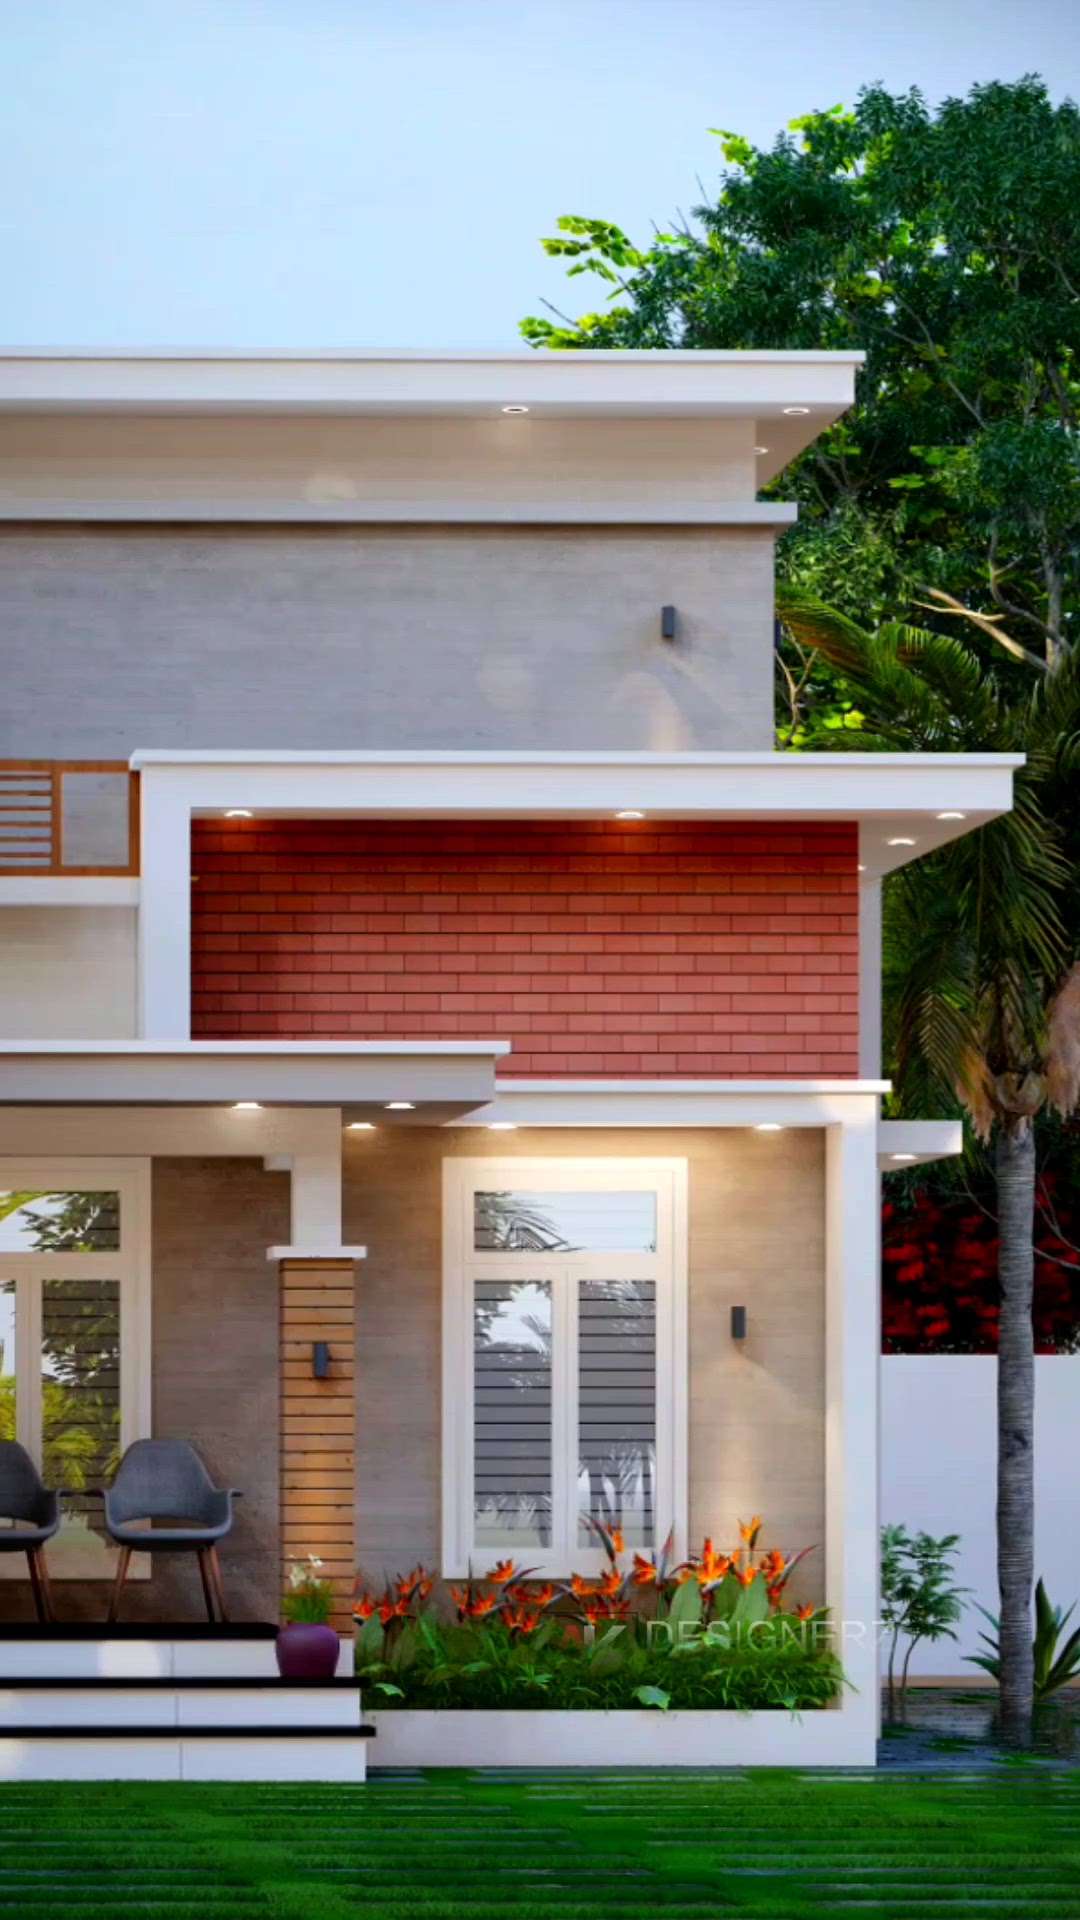 🏠 ✨ Exterior view....
Area __ 960sq
3bhk

Contact: 7561858643

📍Dm Us For Any Design @ak_designz____

Contact me on whatsapp
📞7561858643

#designer_767 #house #housedesign #housedesigns #residentionaldesign #homedesign #residentialdesign #residential #civilengineering #autocad #3ddesign #arcdaily #architecture #architecturedesign #architectural #keralahome
#house3d #keralahomes #keralahomestyle #KeralaStyleHouse #keralastyle #ElevationHome #houseplan #4BHKPlans #homeplan #newplan #ContemporaryDesigns #ContemporaryHouse #semi_contemporary_home_design #homedesigne #HouseDesigns 
@kolo.kerala @archidesign.kerala @archdaily